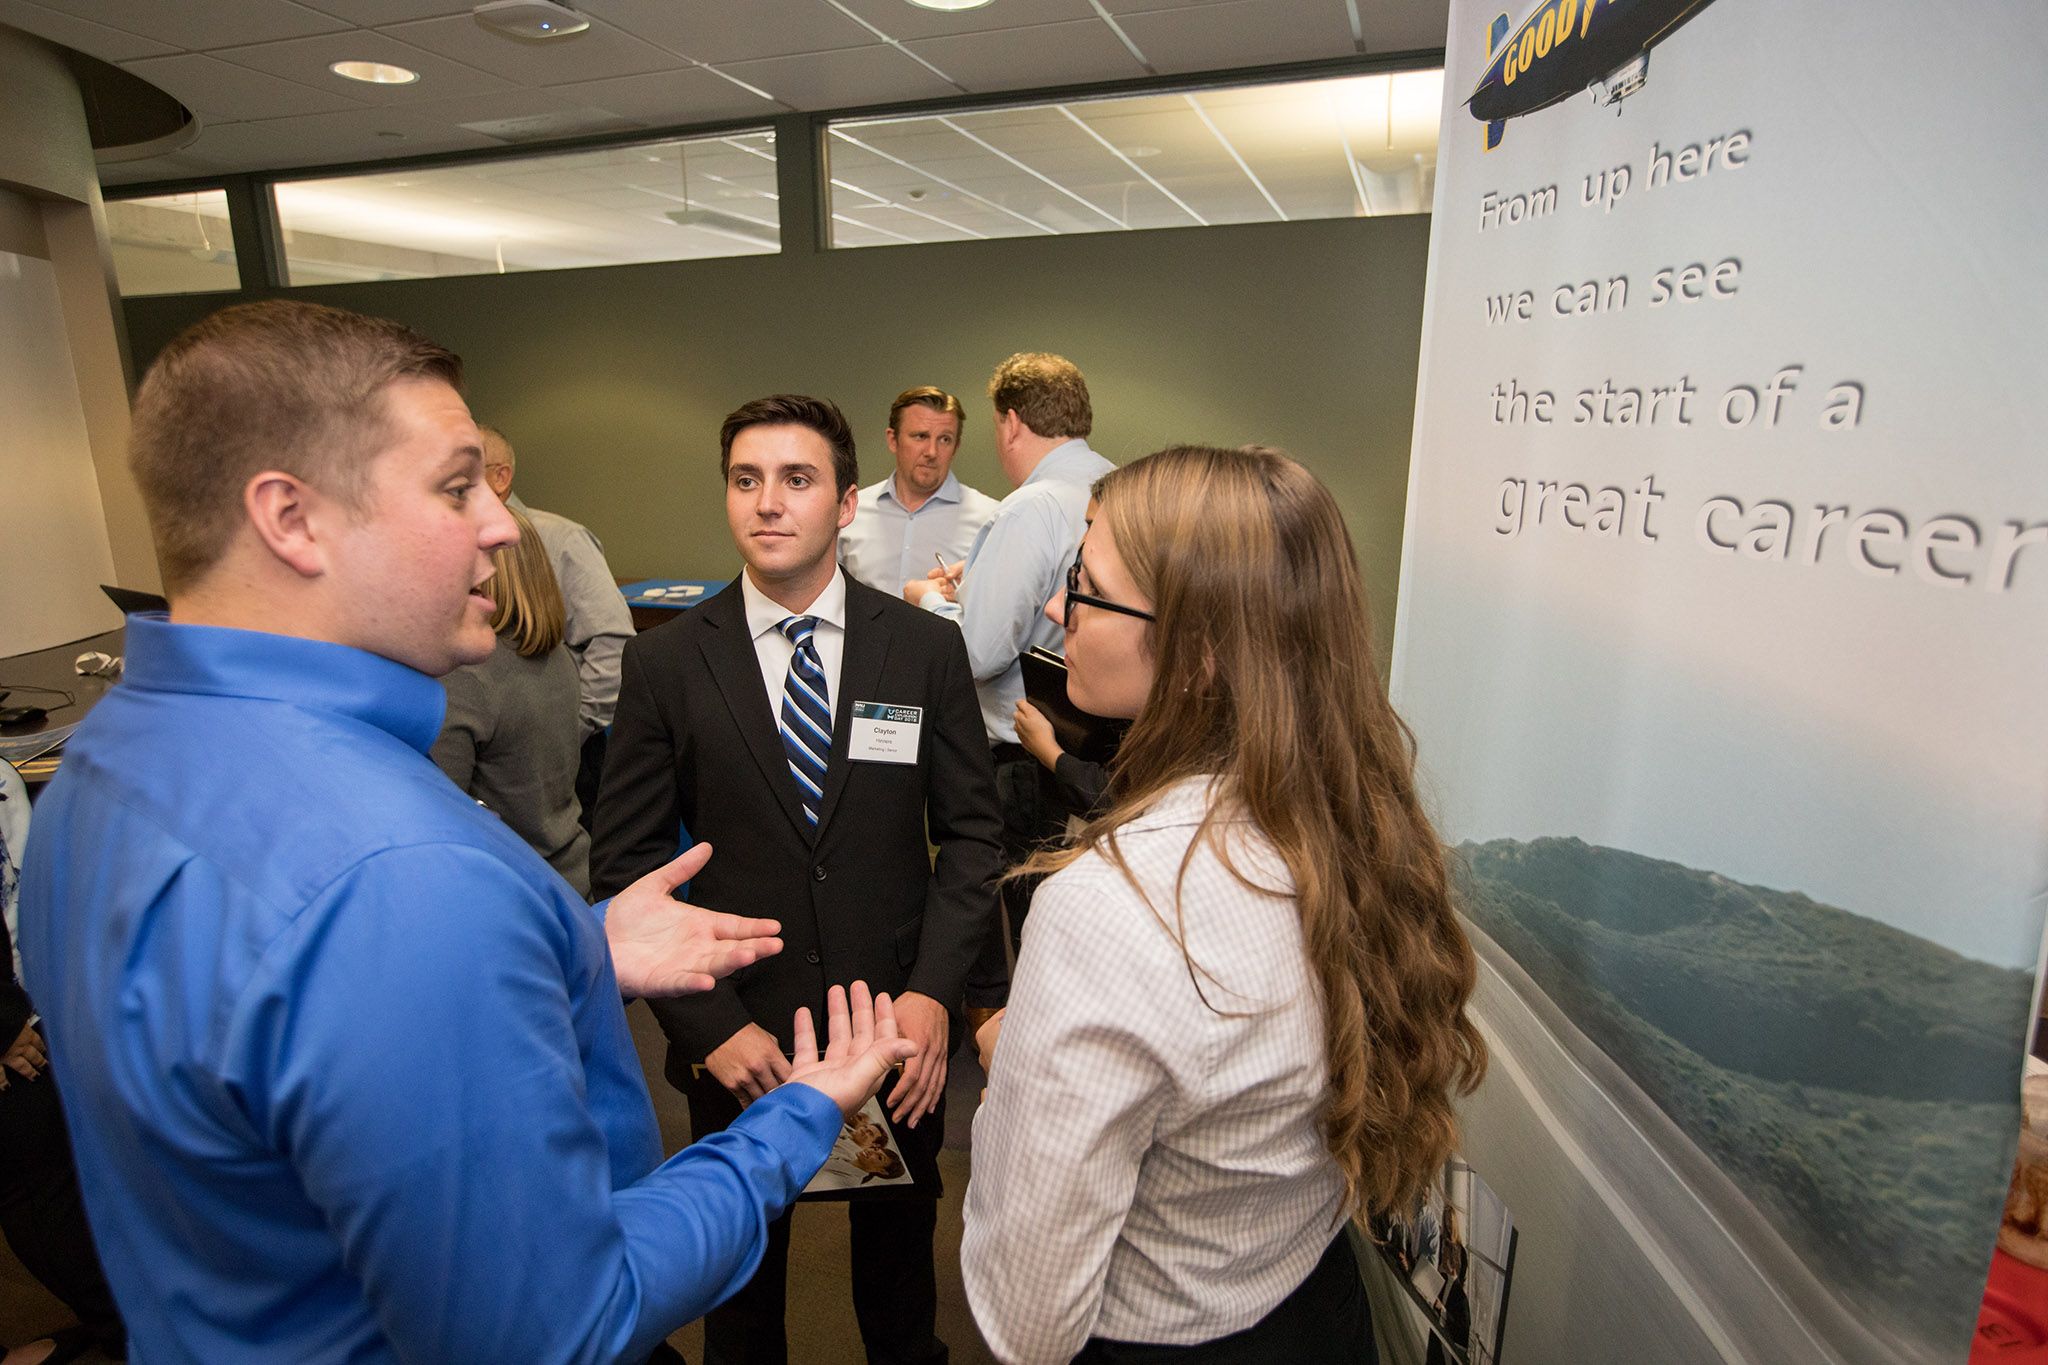 Students and employers participating in a career fair.